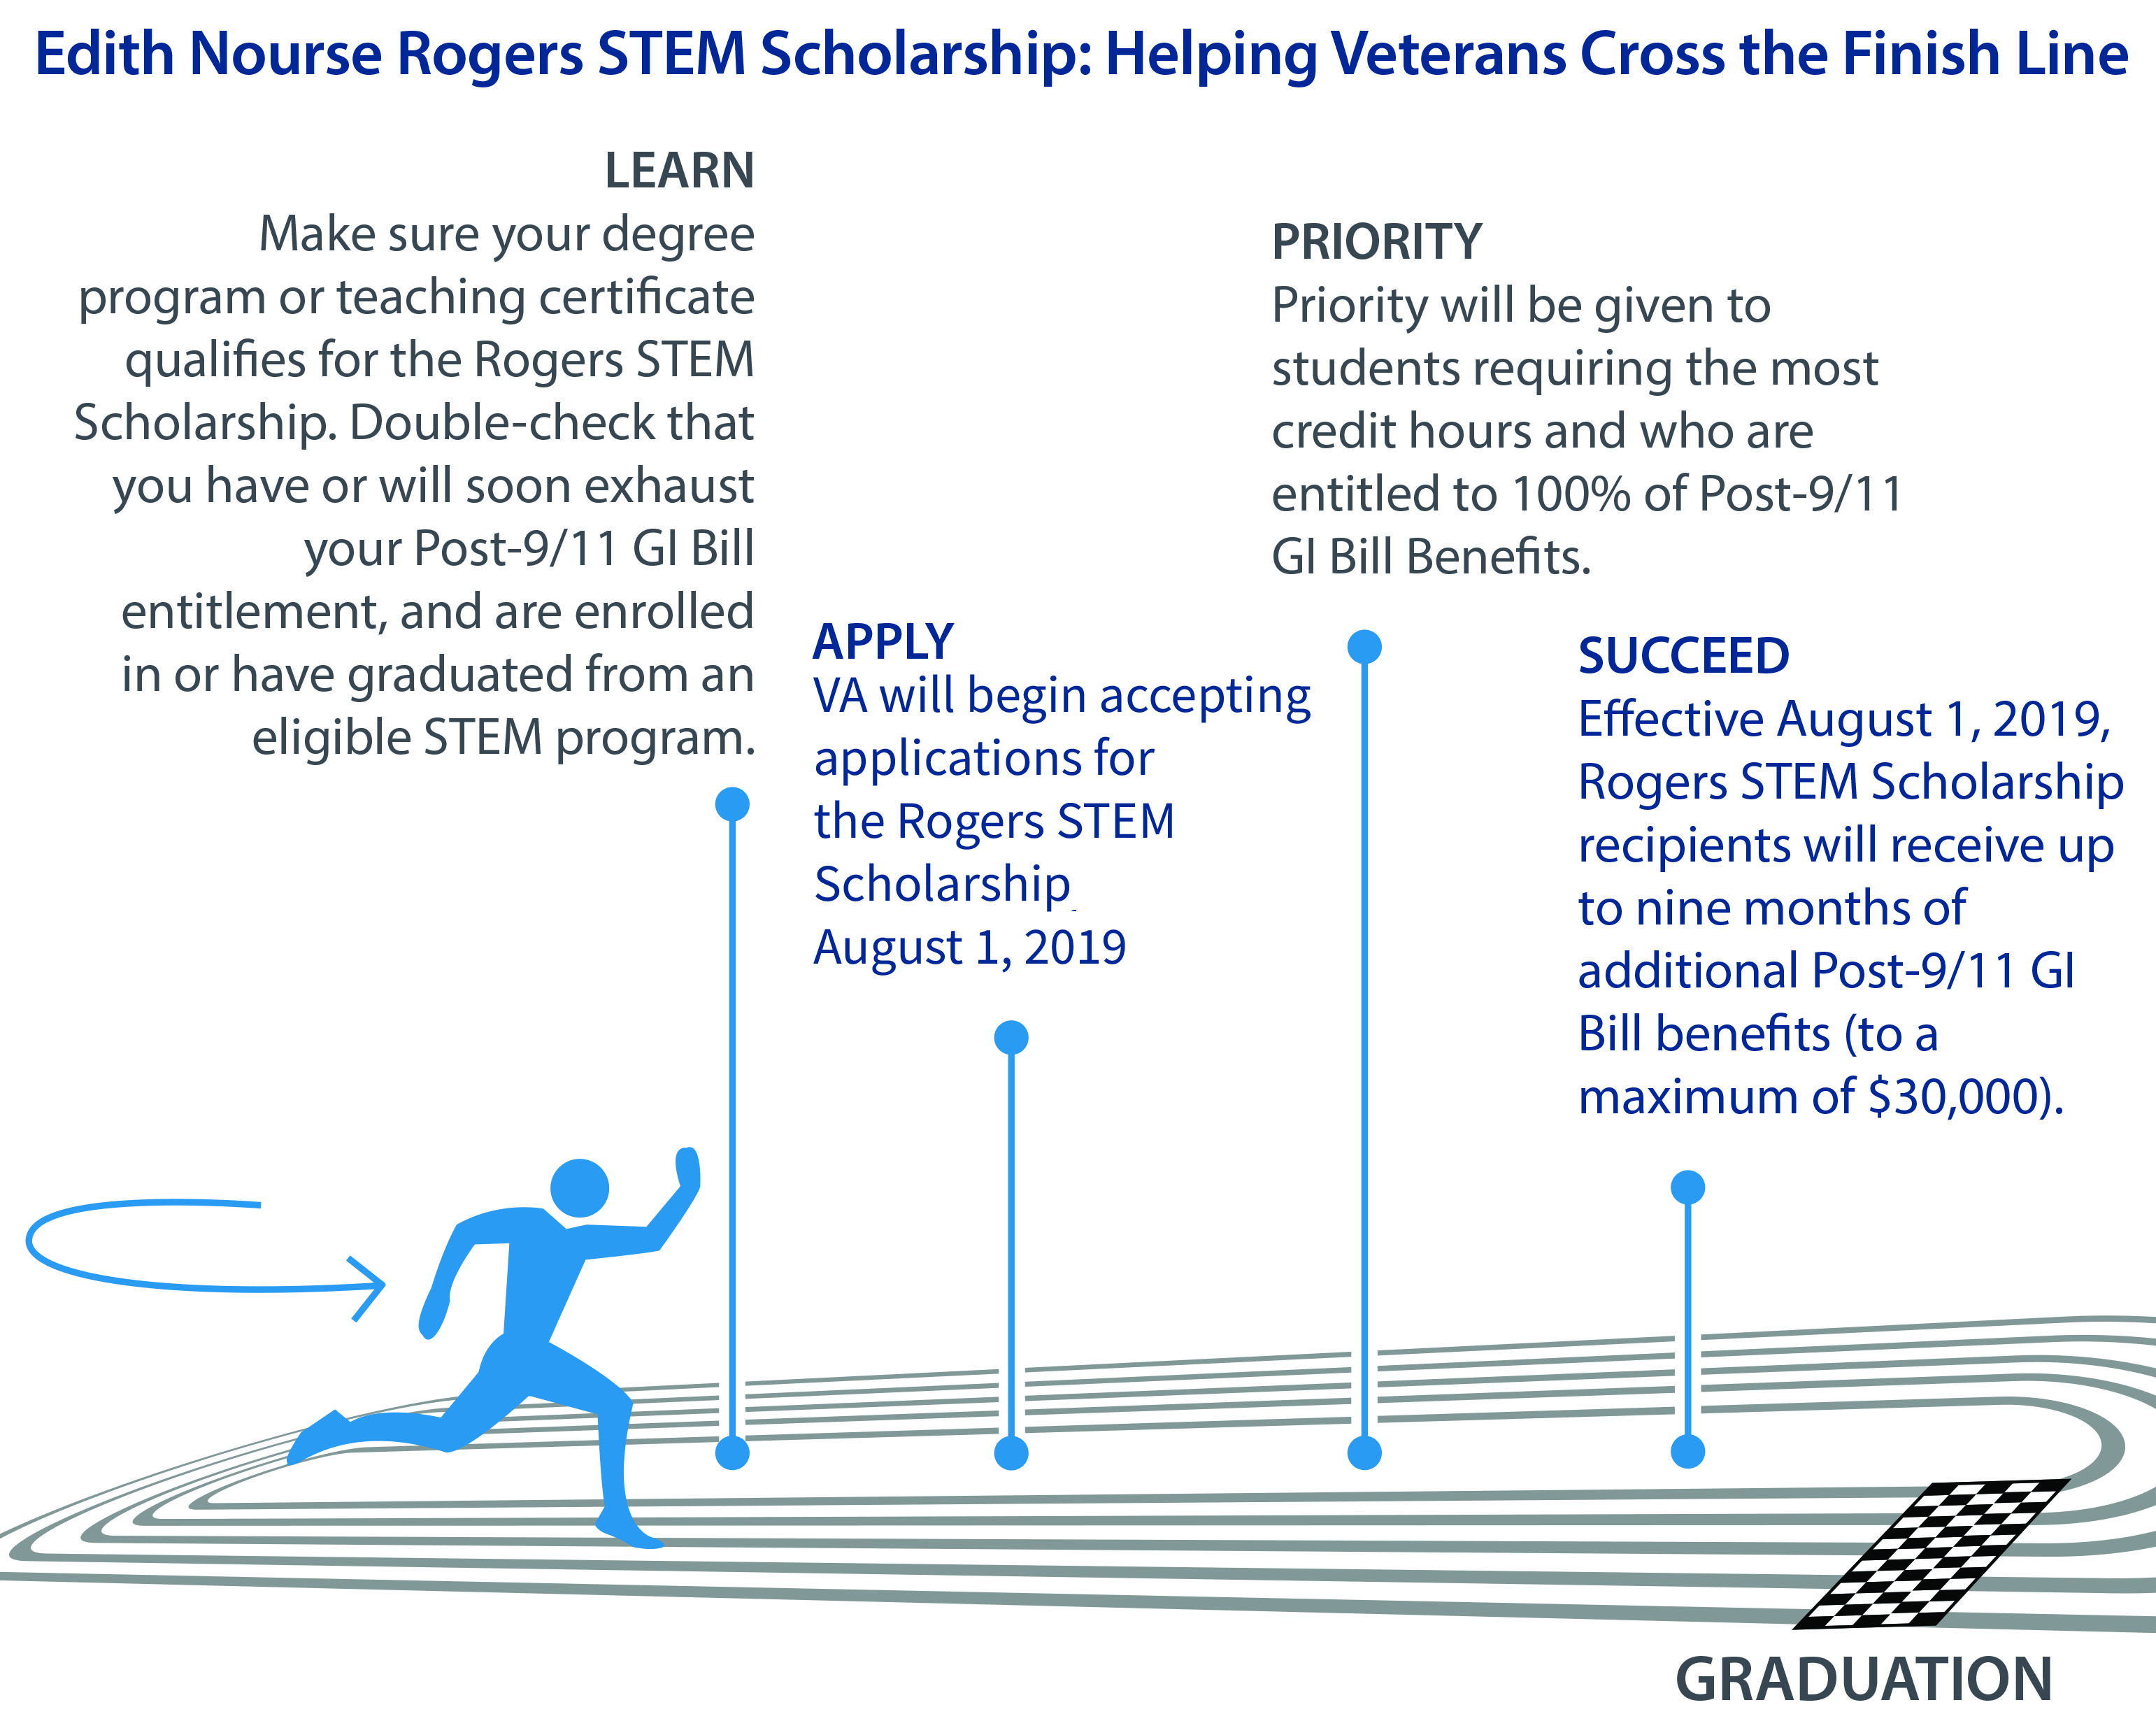   Helping Veterans Cross the Finish Line.  Learn - Make sure your degree program or teaching certificate qualifies for the Rogers STEM Scholarship.  Double-check that you have or will soon exhaust your Post-9/11 GI Bill entitlement, and are enrolled in or have graduated from an eligible STEM program.  Apply - VA will begin accepting applications for the Rogers STEM Scholarship August 1, 2019.  Priority - Priority will be given to students requiring the most credit hours and who are entitled to 100% of Post-9/11 GI Bill Benefits.   Succeed - Effective August 1, 2019, Rogers STEM Scholarship receipients will receive up to nine months of additional Post-9/11 GI Bill benefits (to a maximum of $30,000).